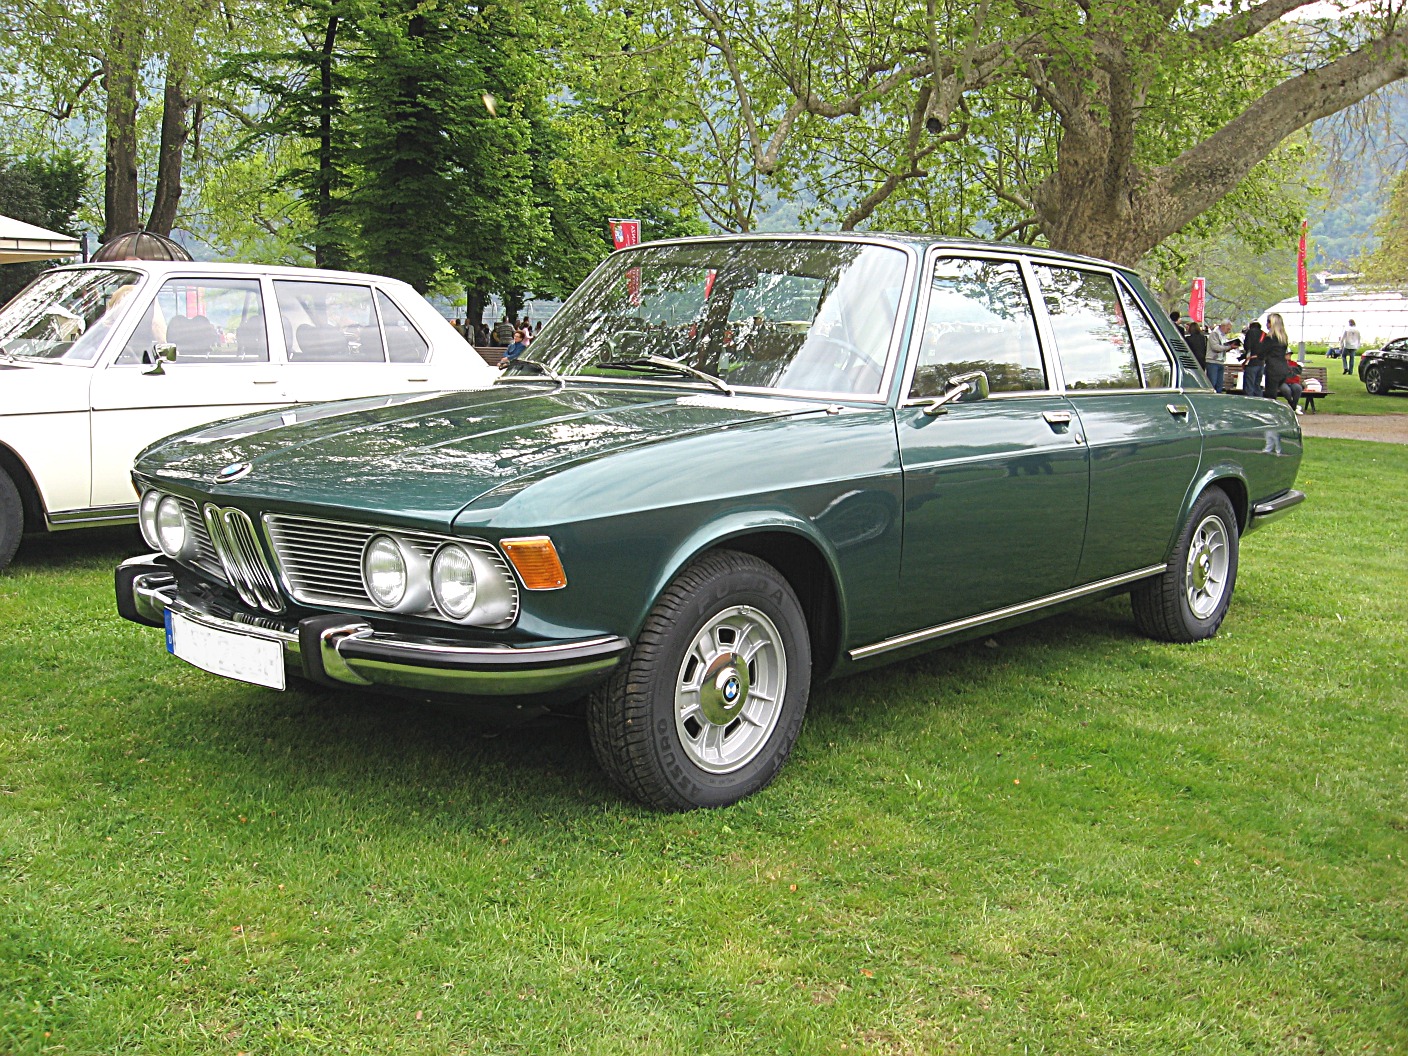 File:BMW 2500-E3 Front-view.JPG - Wikimedia Commons